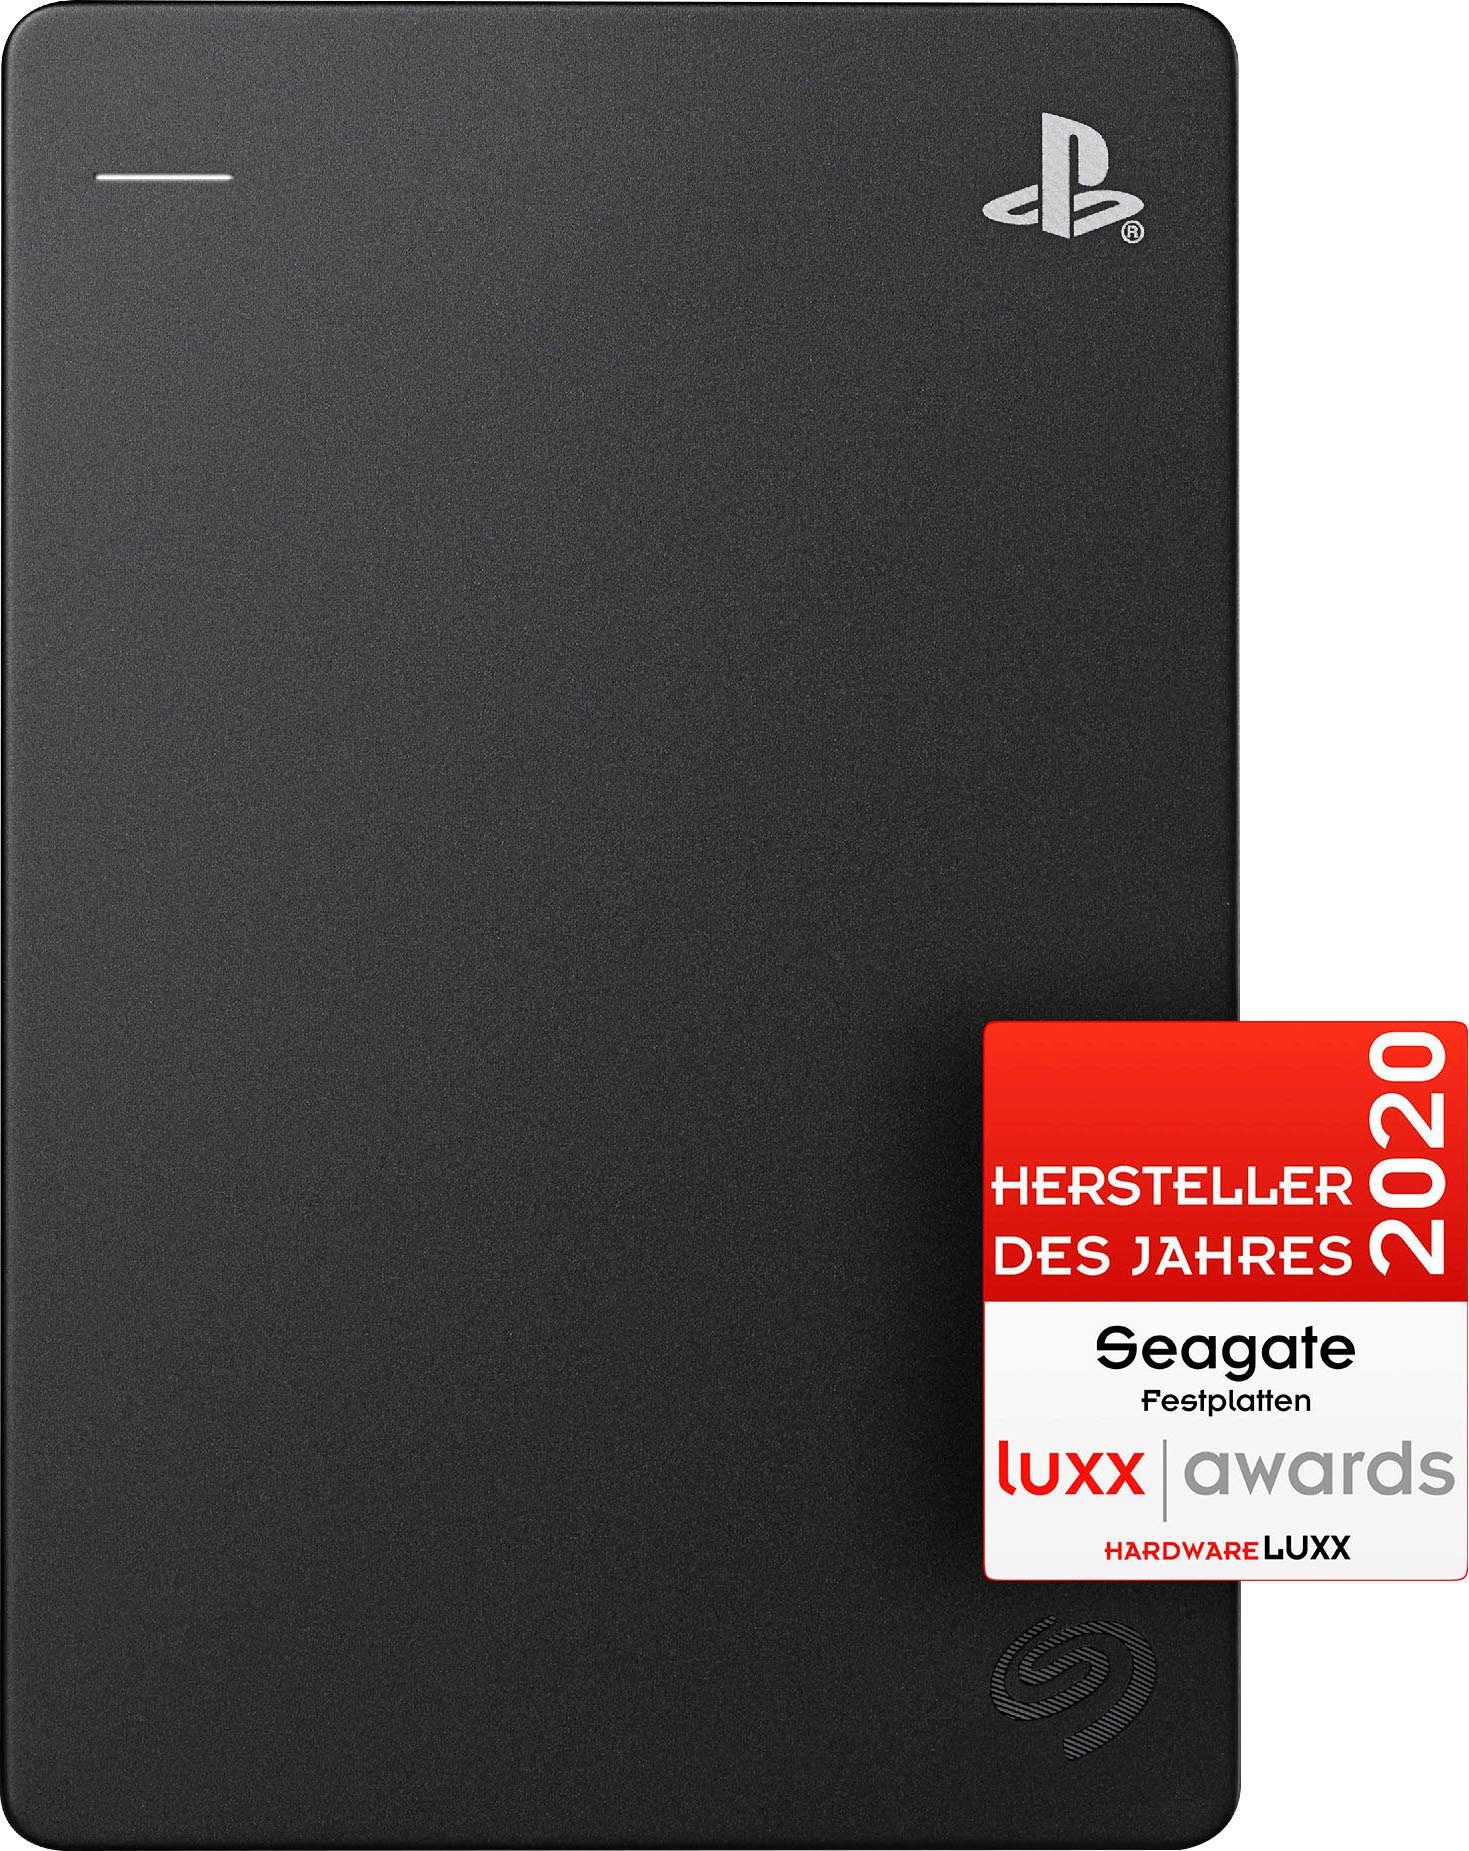 PS4 TB) Drive Gaming-Festplatte Game 2,5" Seagate (2 STGD2000200 externe